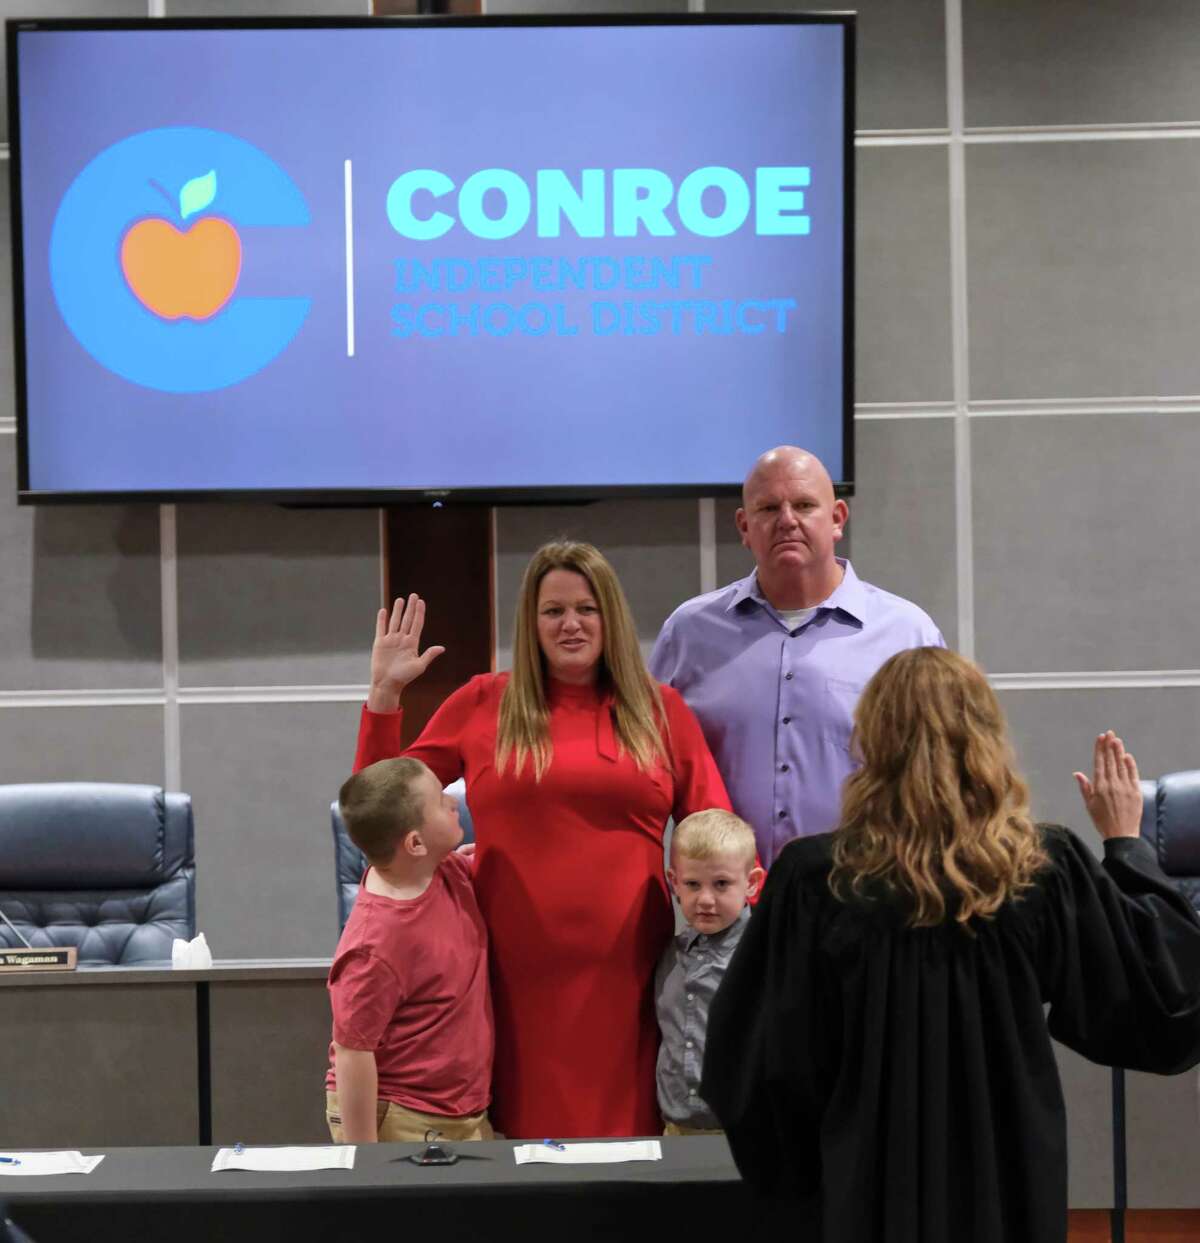 2022. Melissa Dungan (C) is sworn in as a Conroe I.S.D Trustee, while her family stands with her on Friday, Nov. 18, 2022, in Conroe.